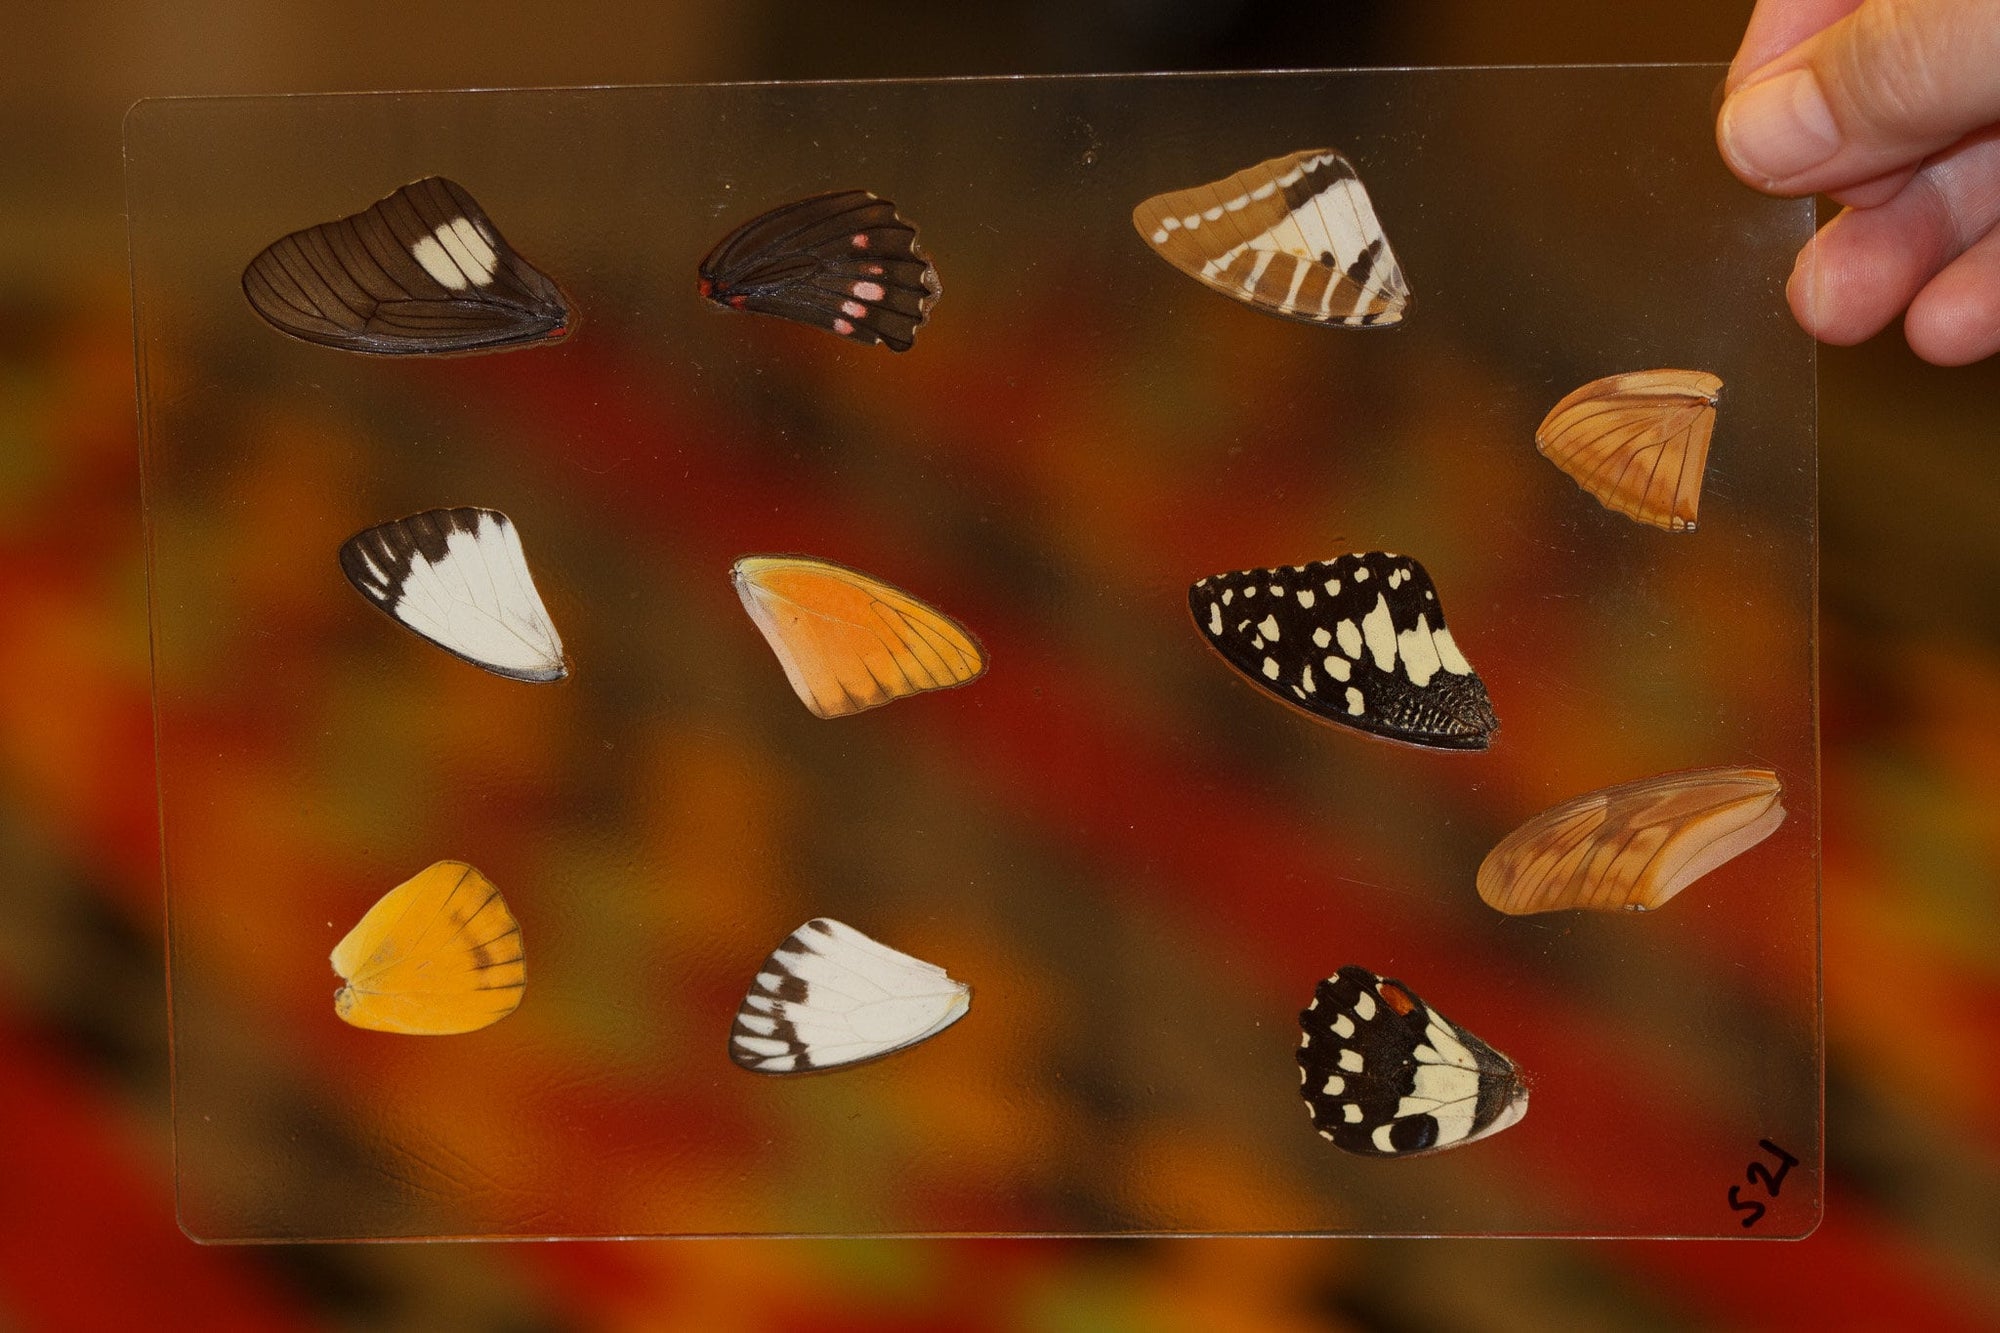 Butterfly Wings GLOSSY LAMINATED SHEET Real Ethically Sourced Specimens Moths Butterflies Wings for Art -- S21